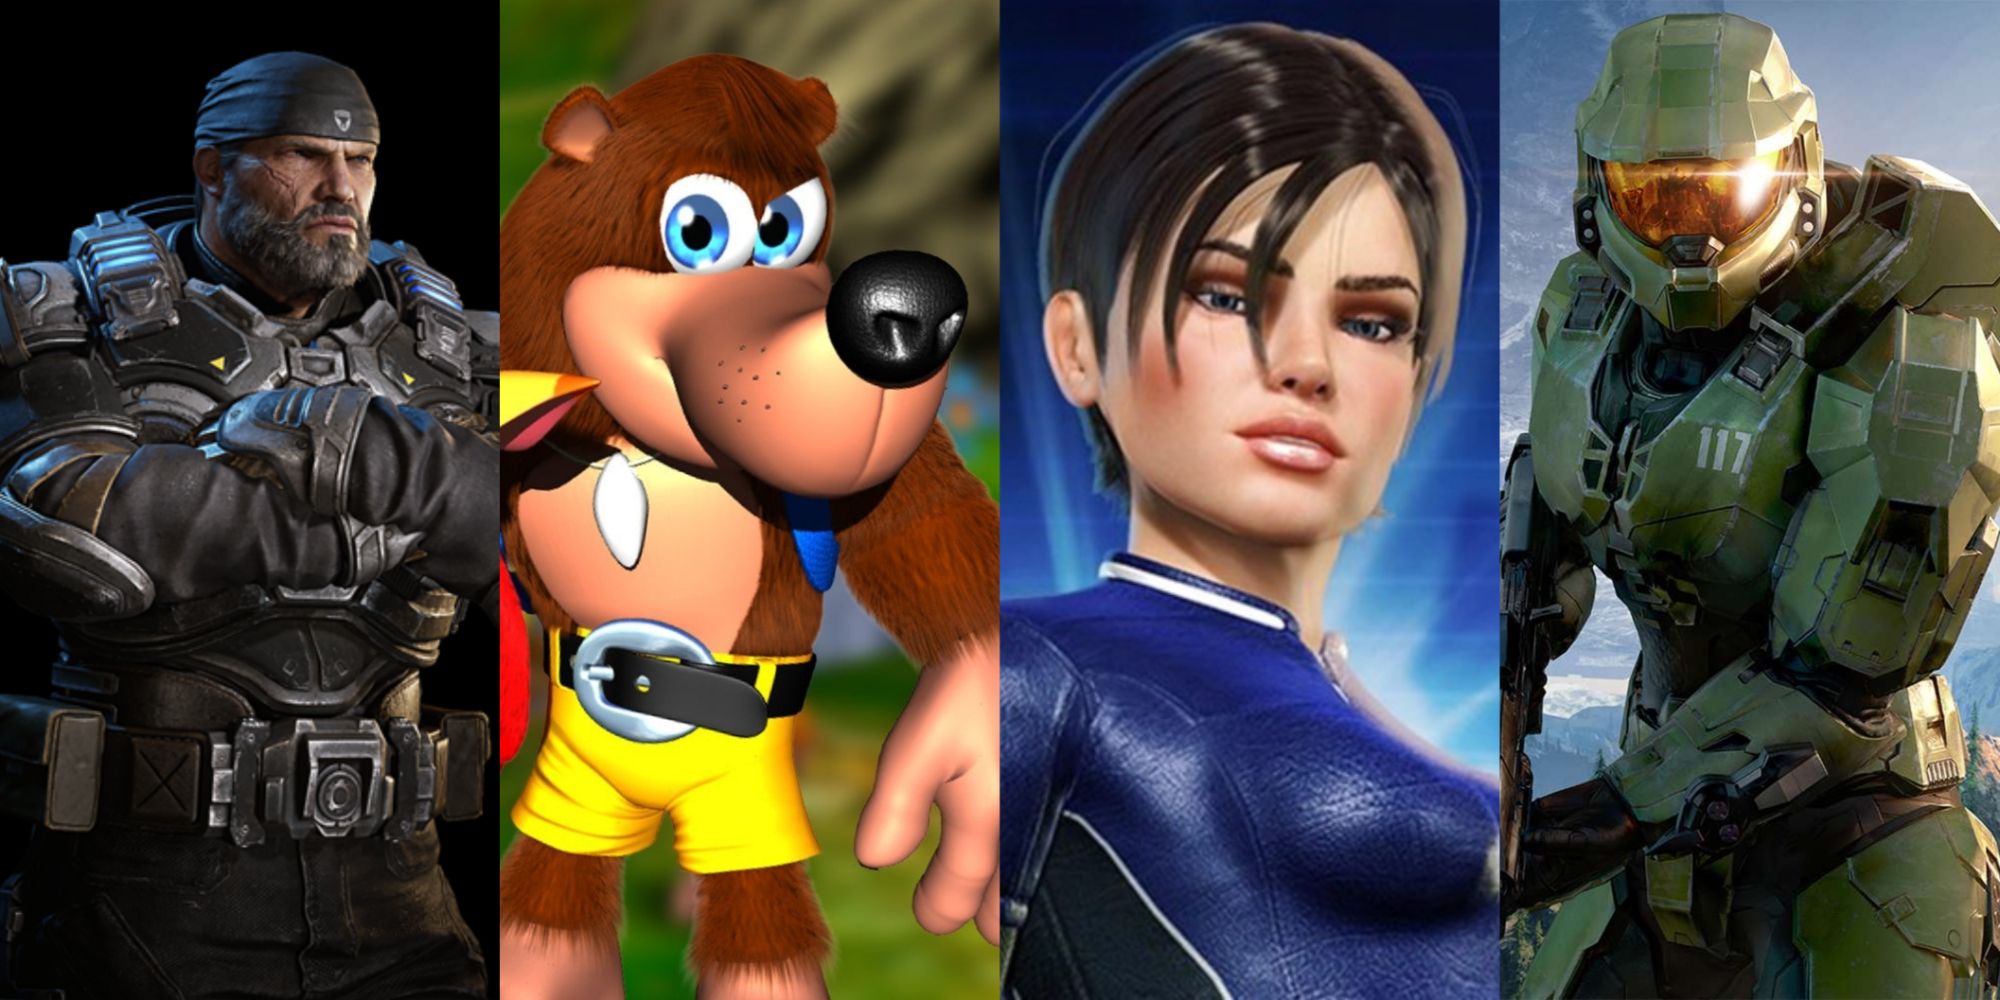 Characters That Should Be In An Xbox Smash Bros.